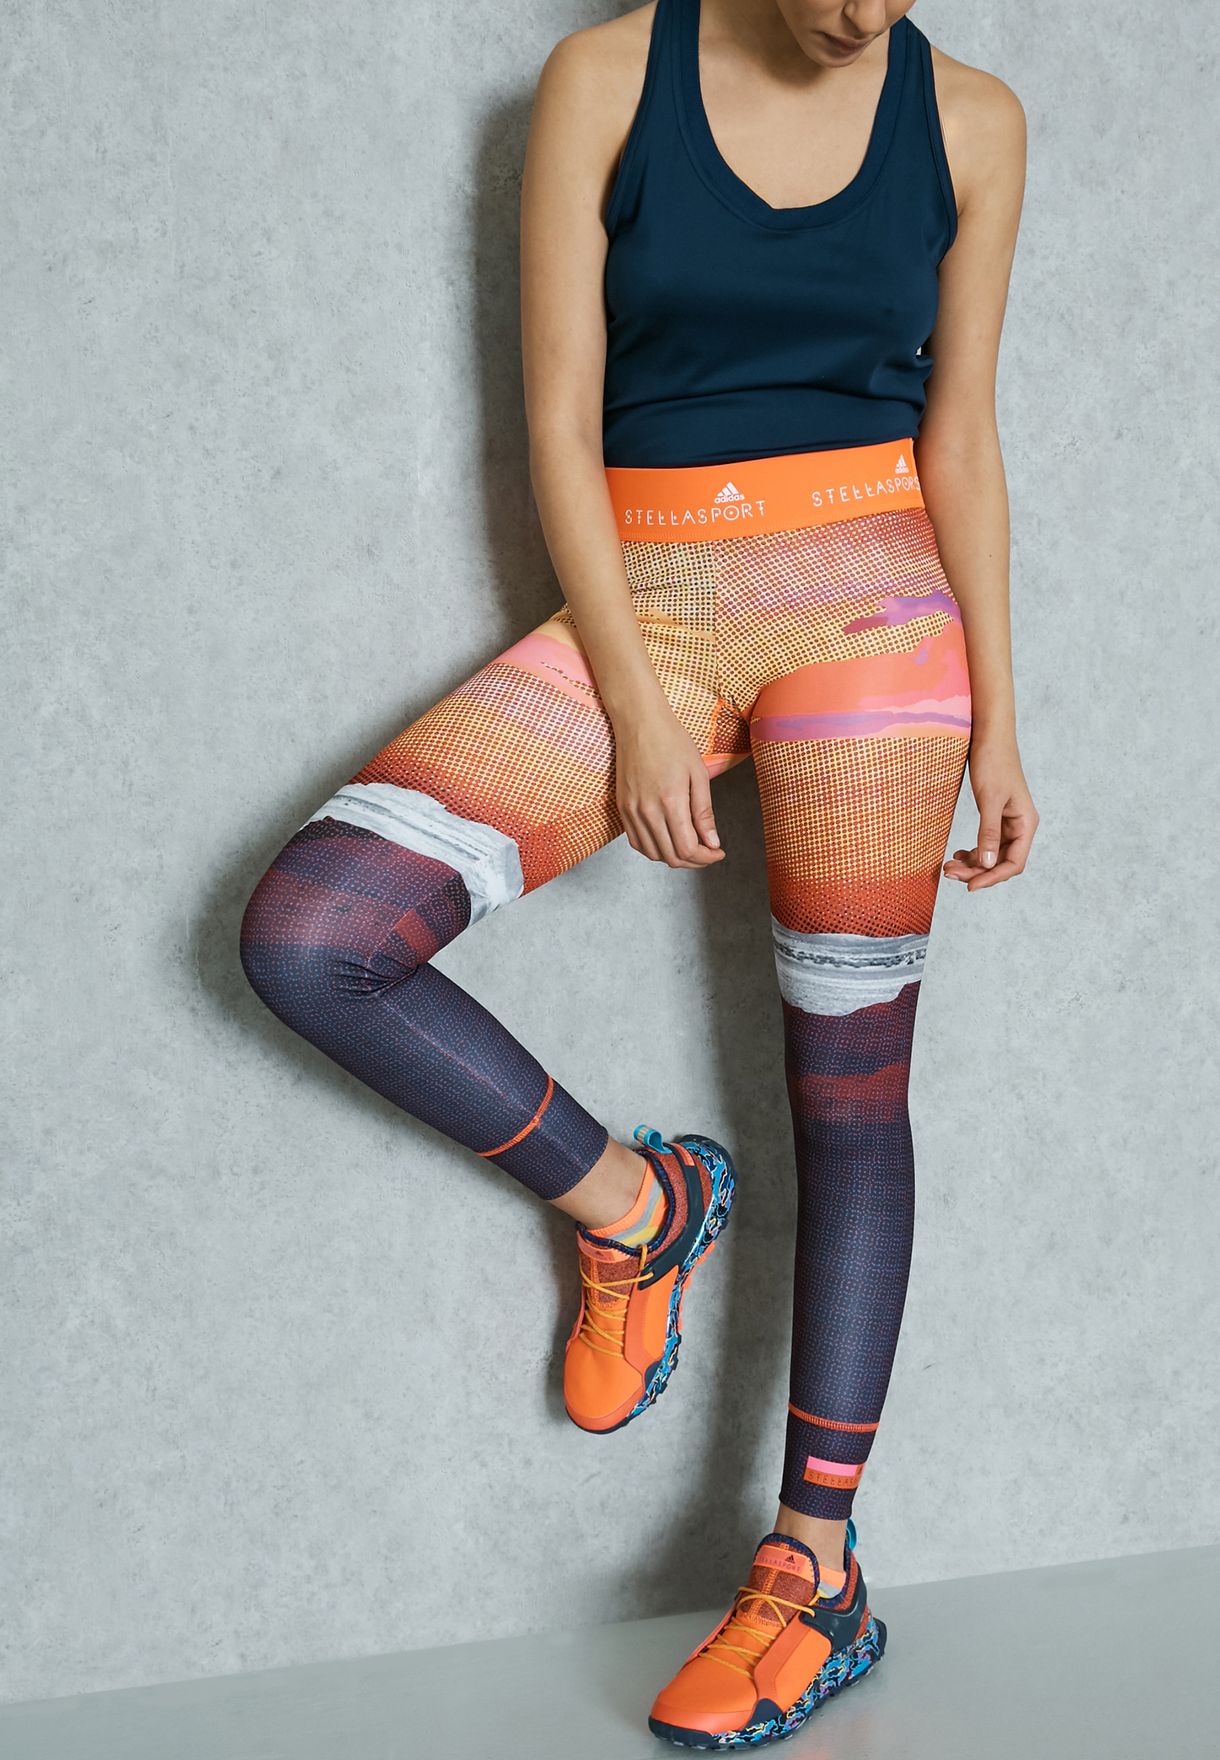 sunrise Bluebell Joint adidas stellasport tights Put together Overcast atmosphere